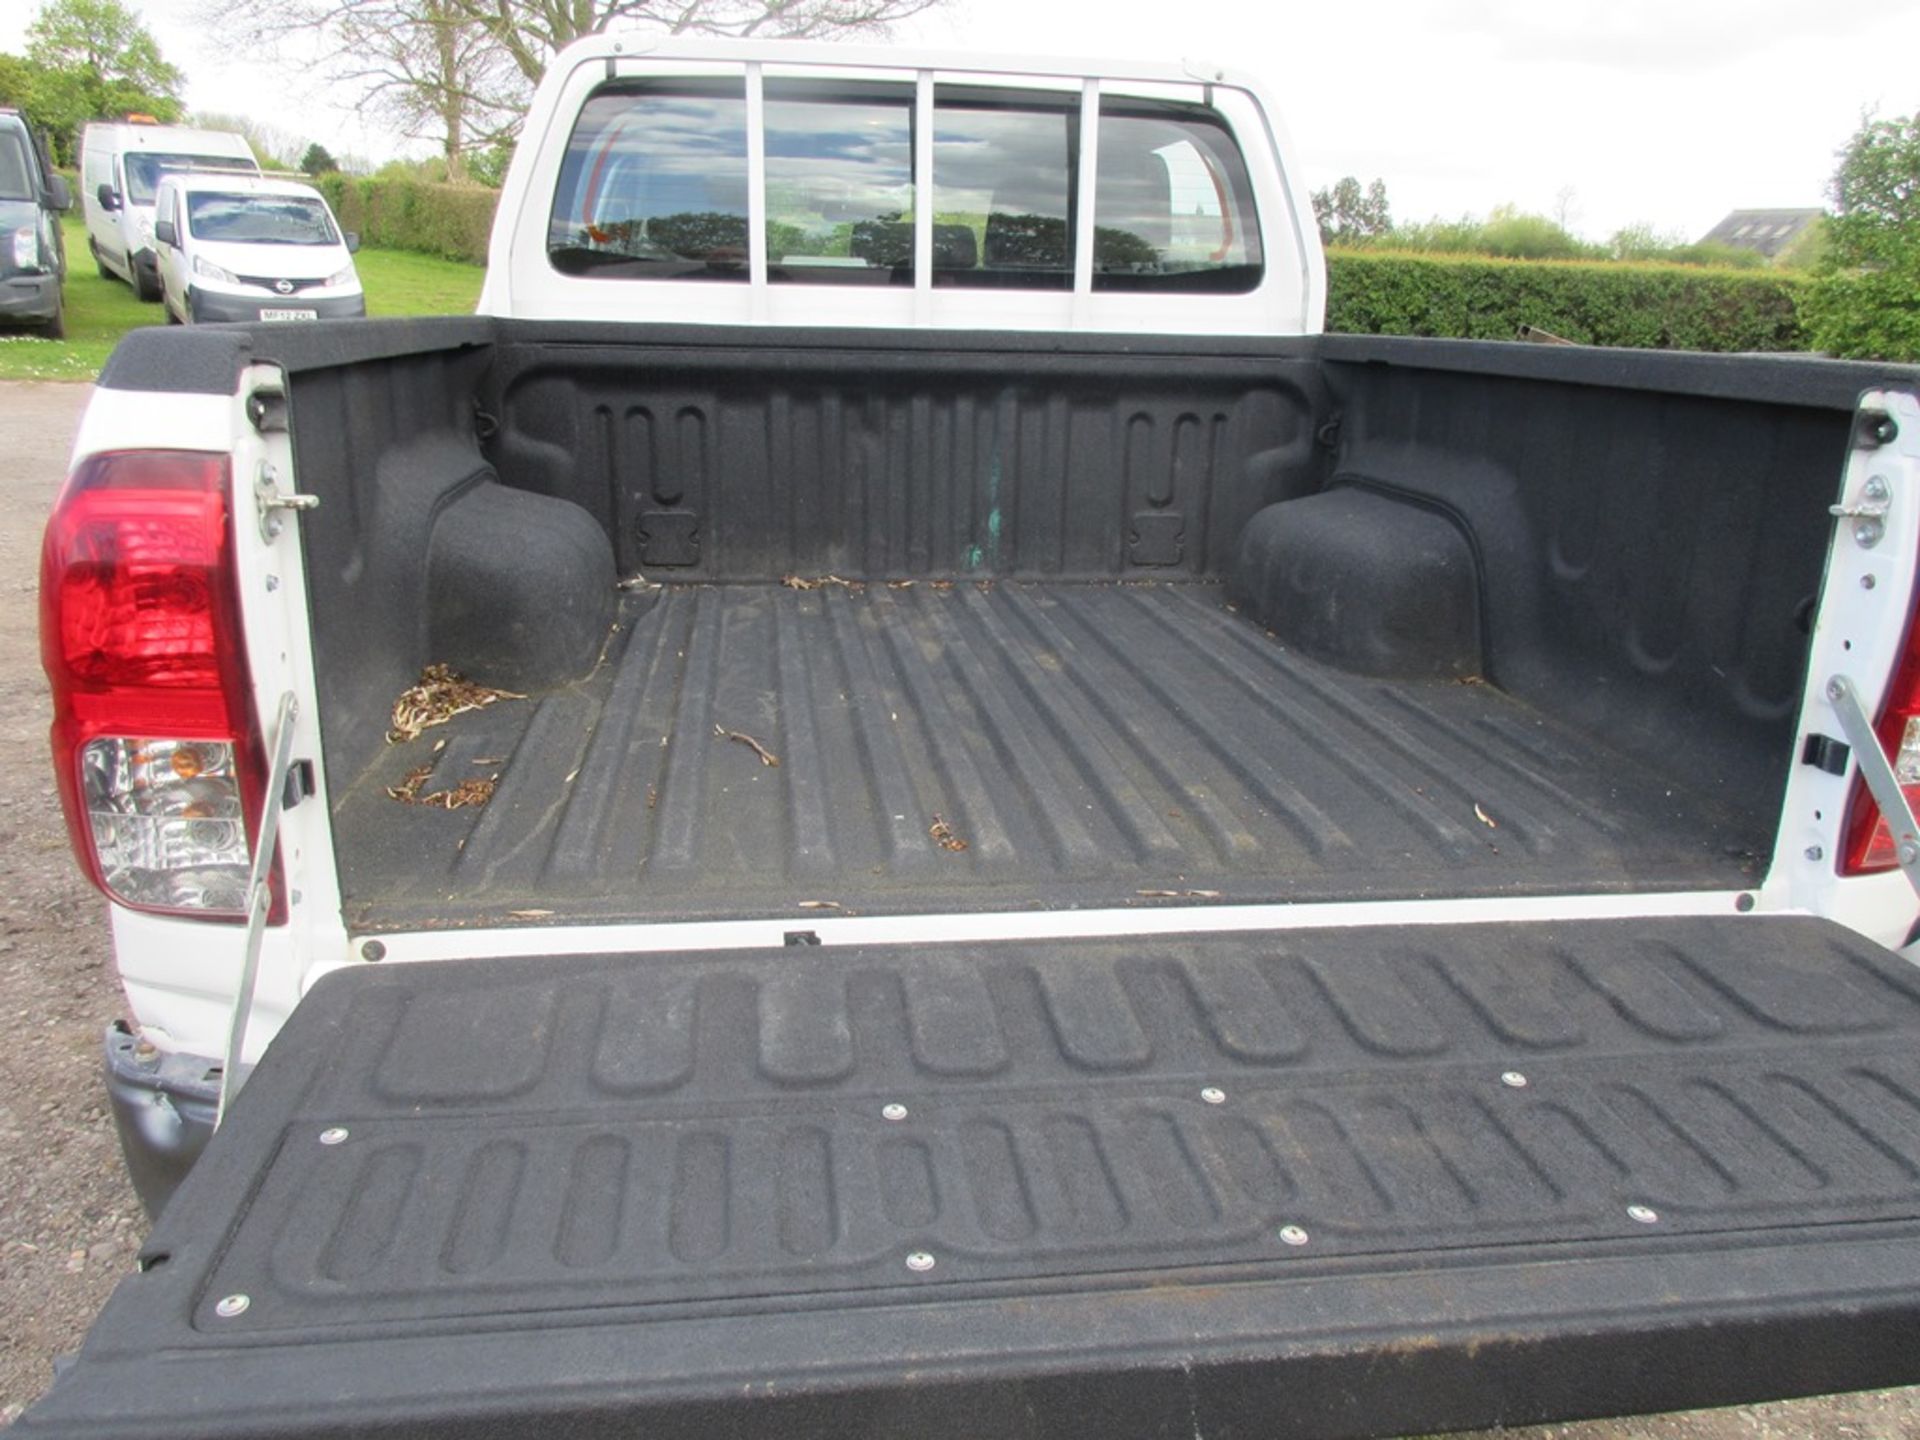 Toyota Hilux Active 2.4D-4D 4Wd Double Cab pickup, 147bhp (19/01/2021) - Image 17 of 18